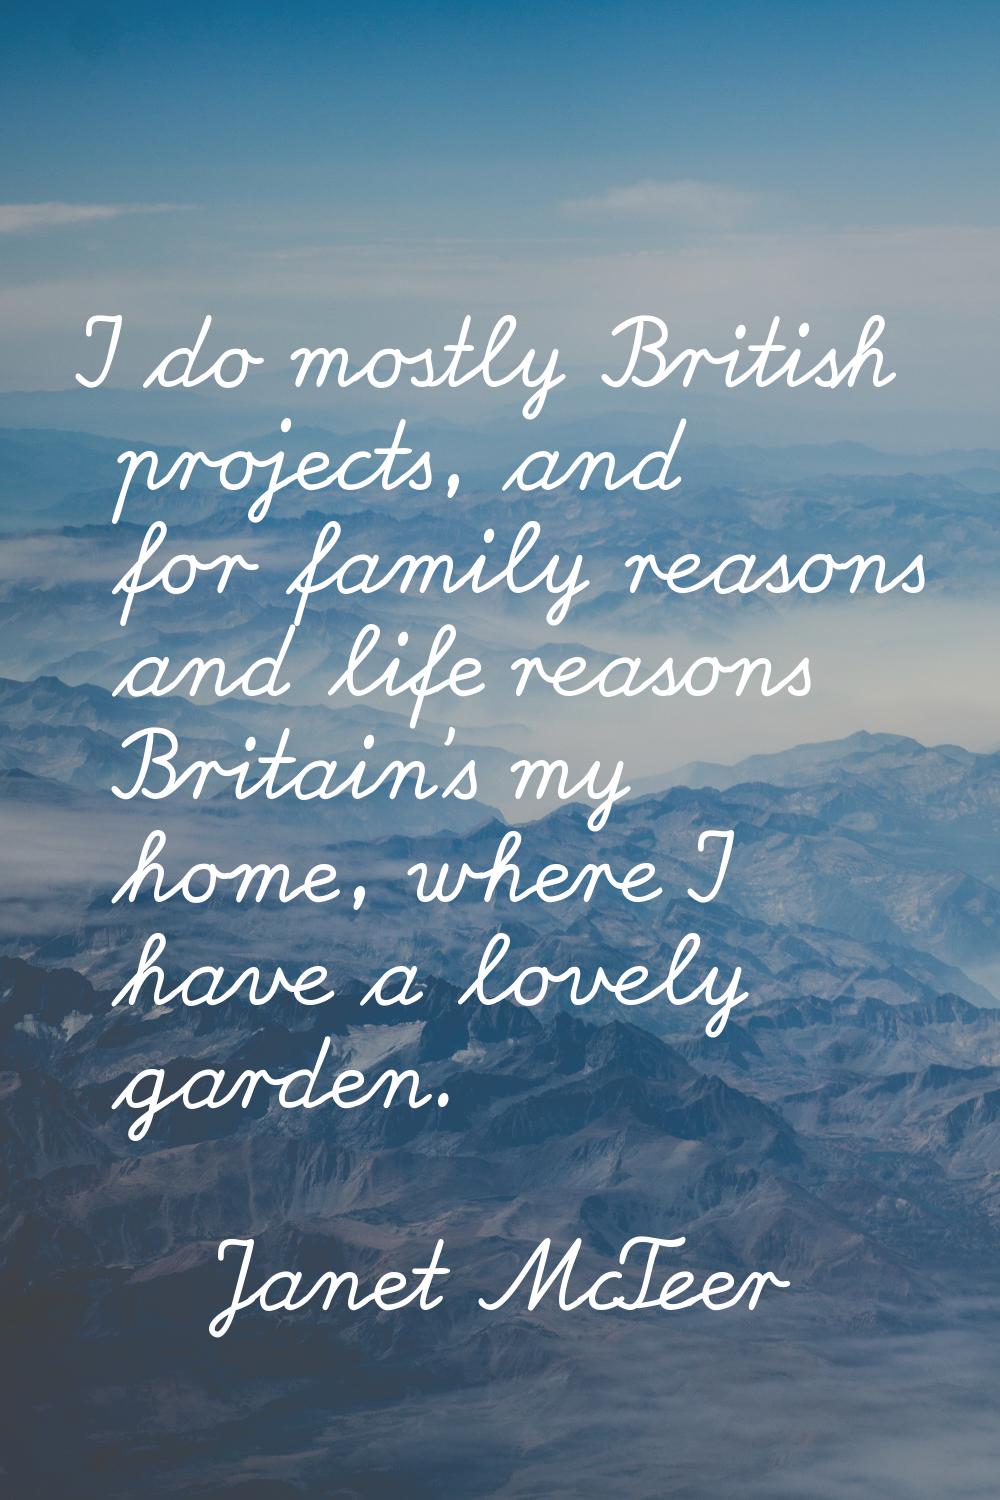 I do mostly British projects, and for family reasons and life reasons Britain's my home, where I ha